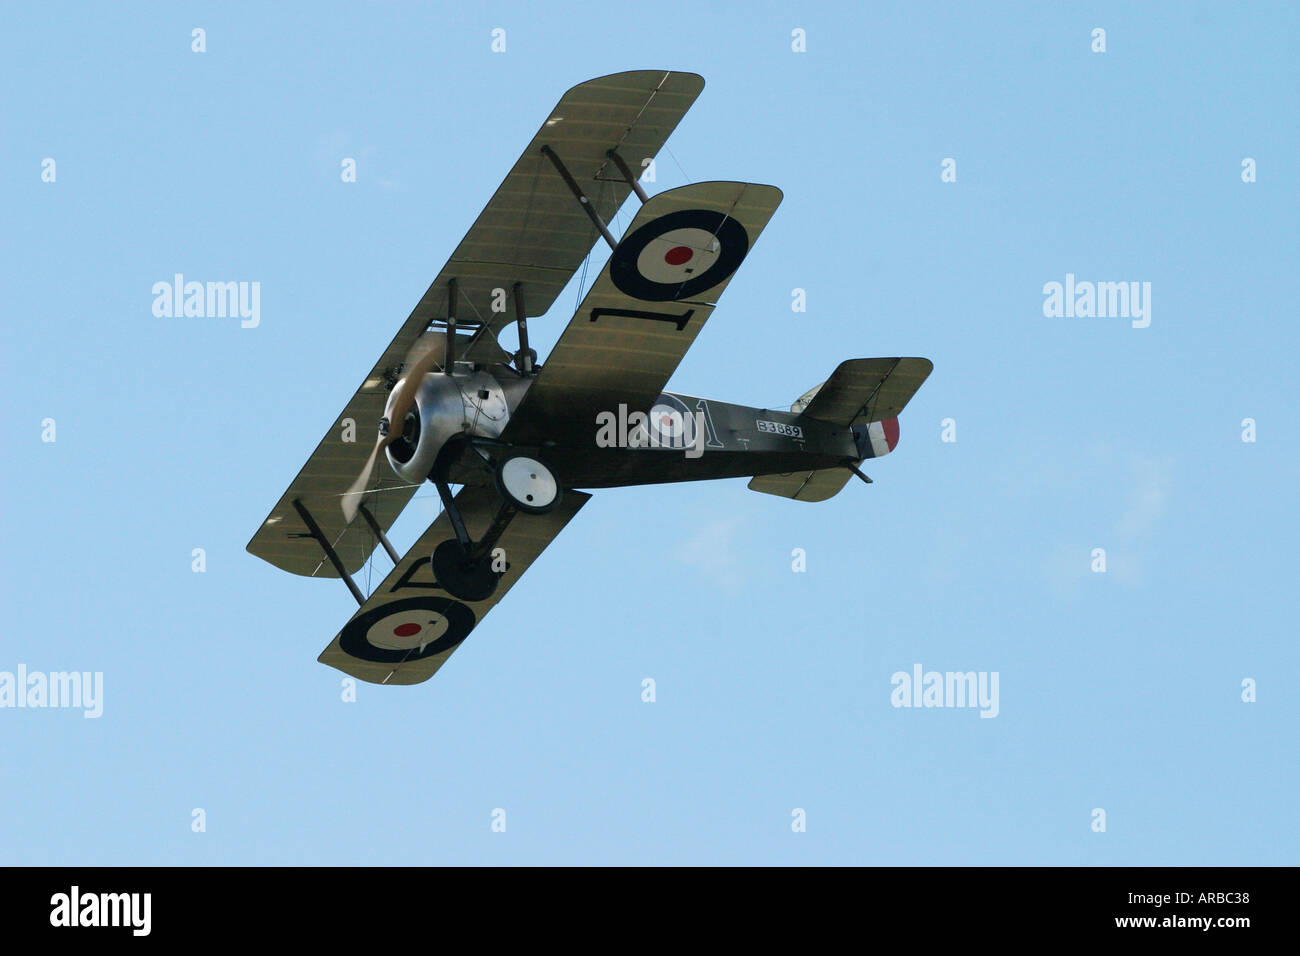 Sopwith Camel WWI Fighter Plane Stock Photo